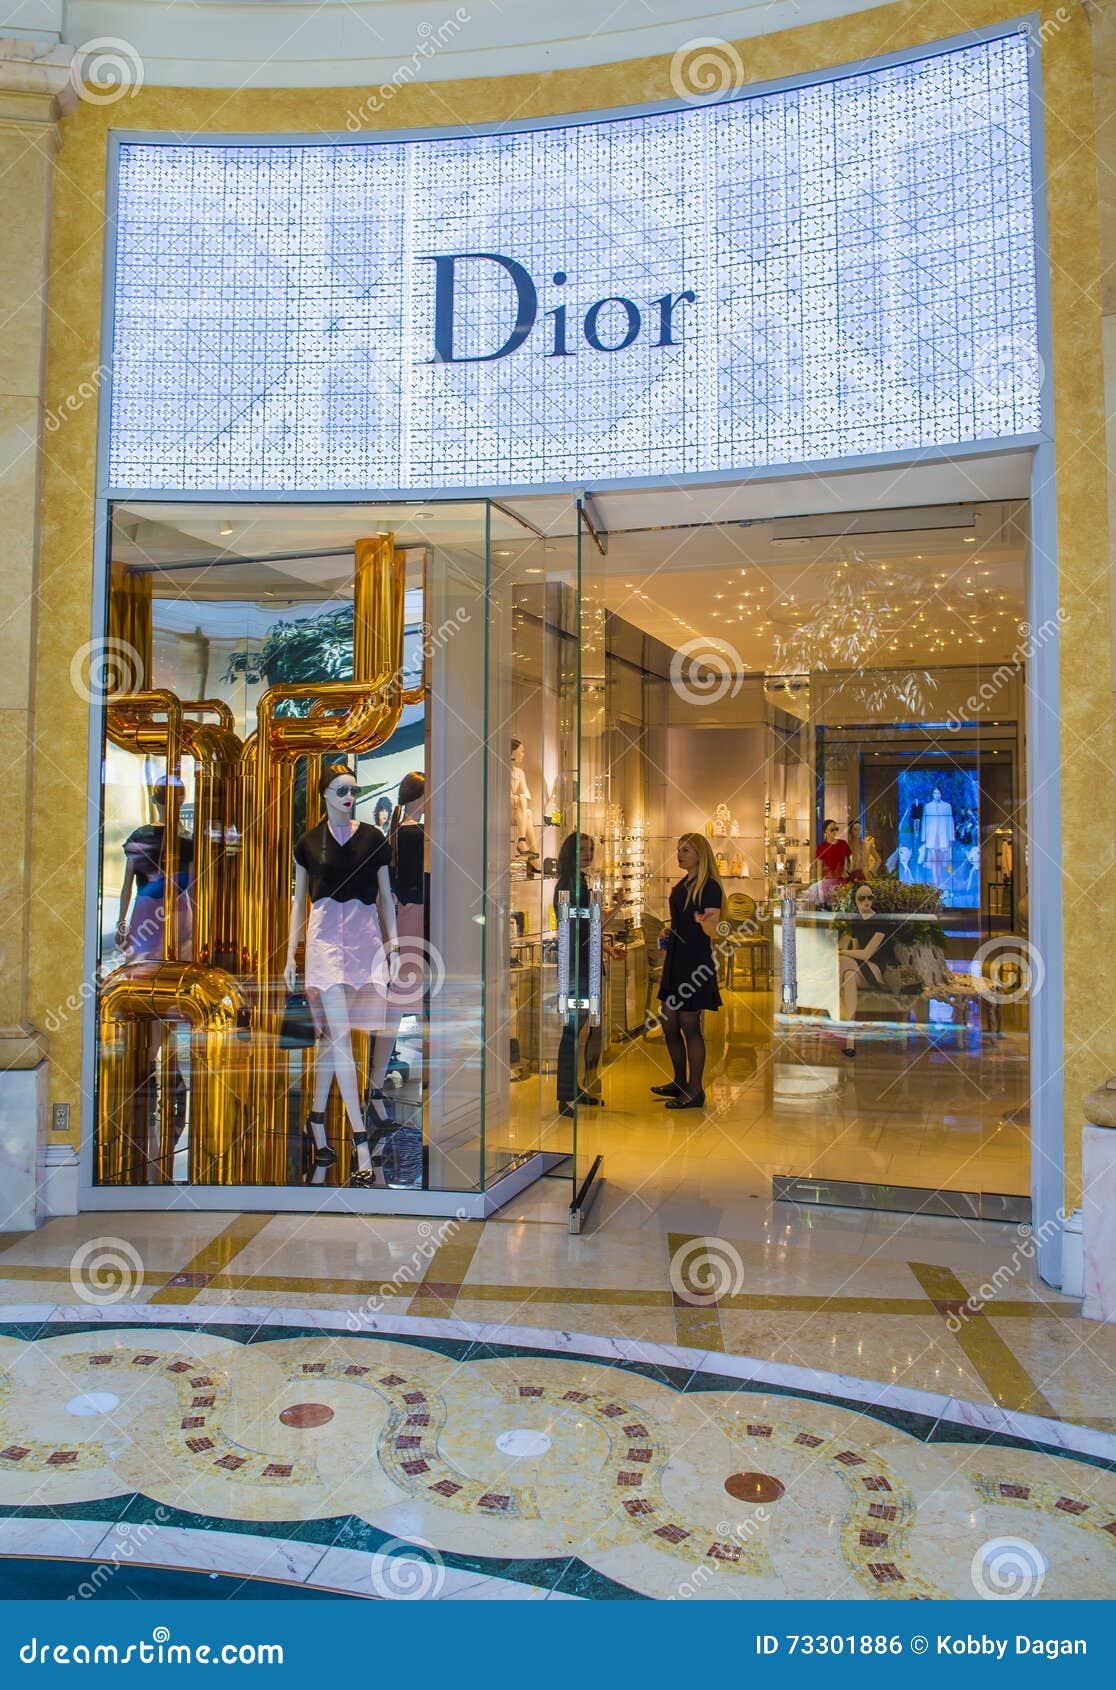 Dior - a French Luxury Fashion House Editorial Photography - Image